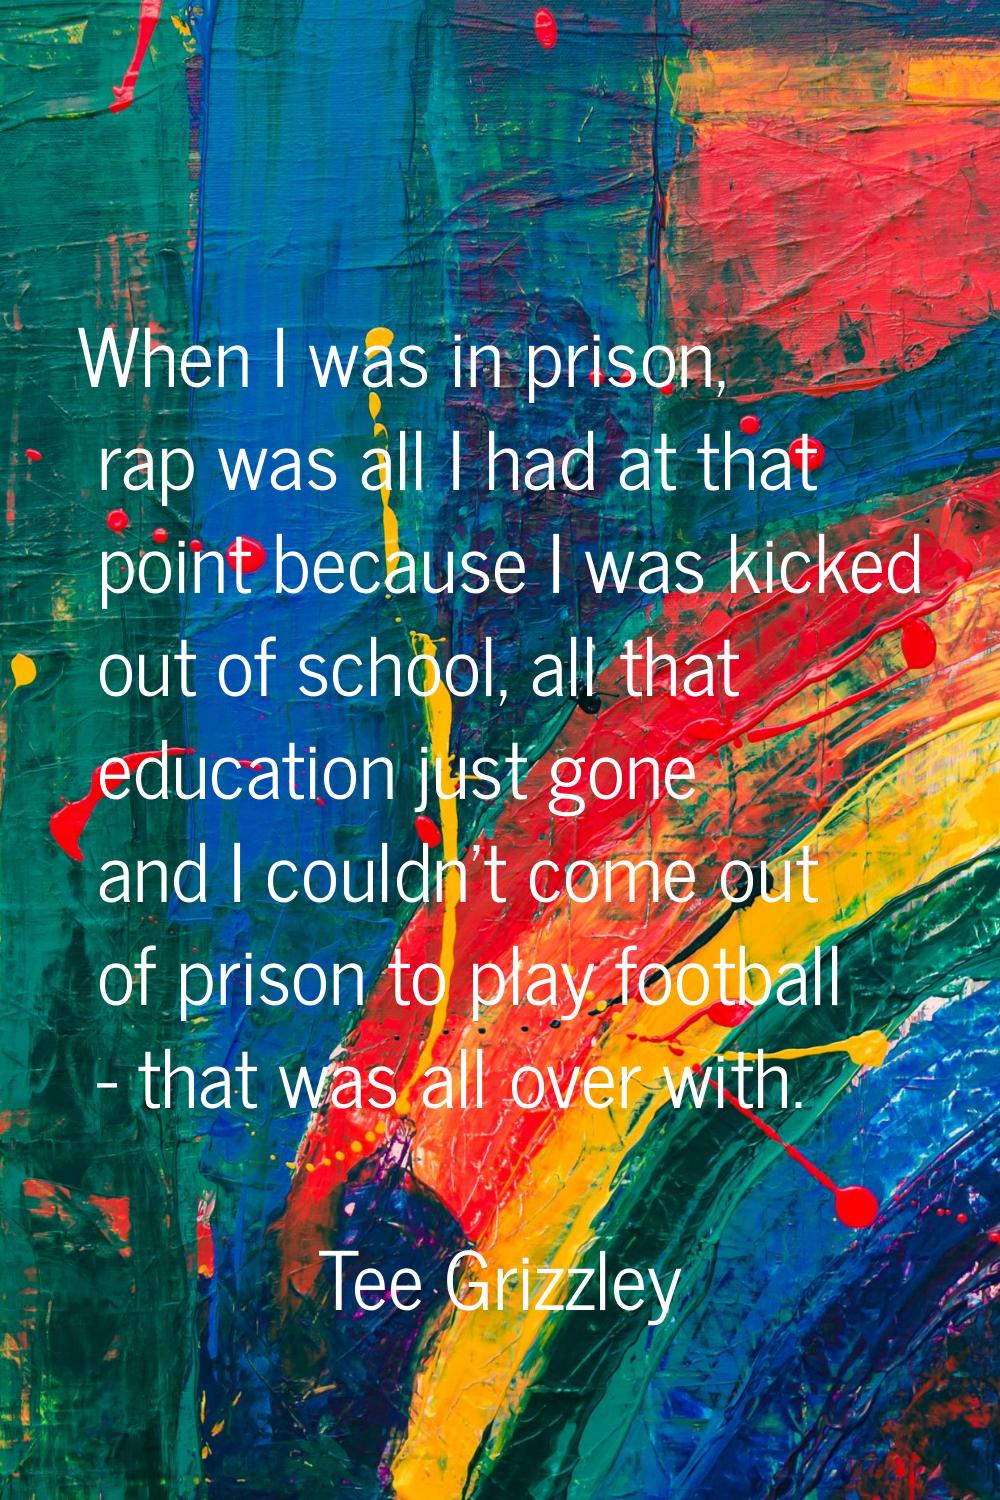 When I was in prison, rap was all I had at that point because I was kicked out of school, all that 